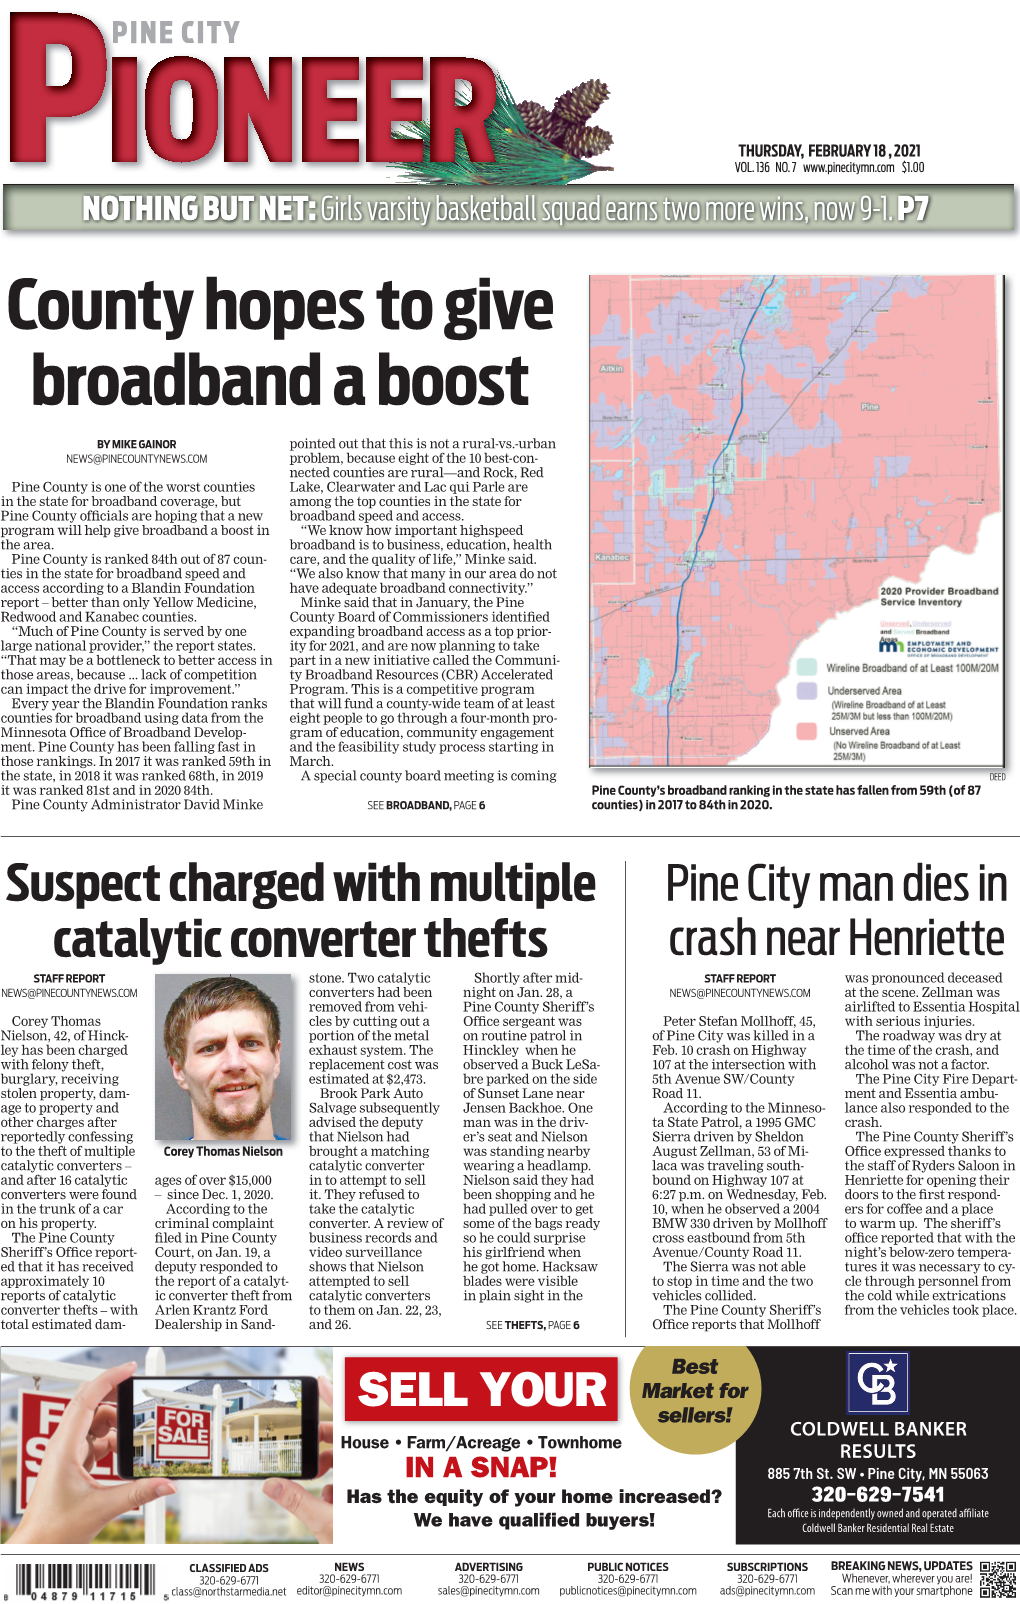 County Hopes to Give Broadband a Boost